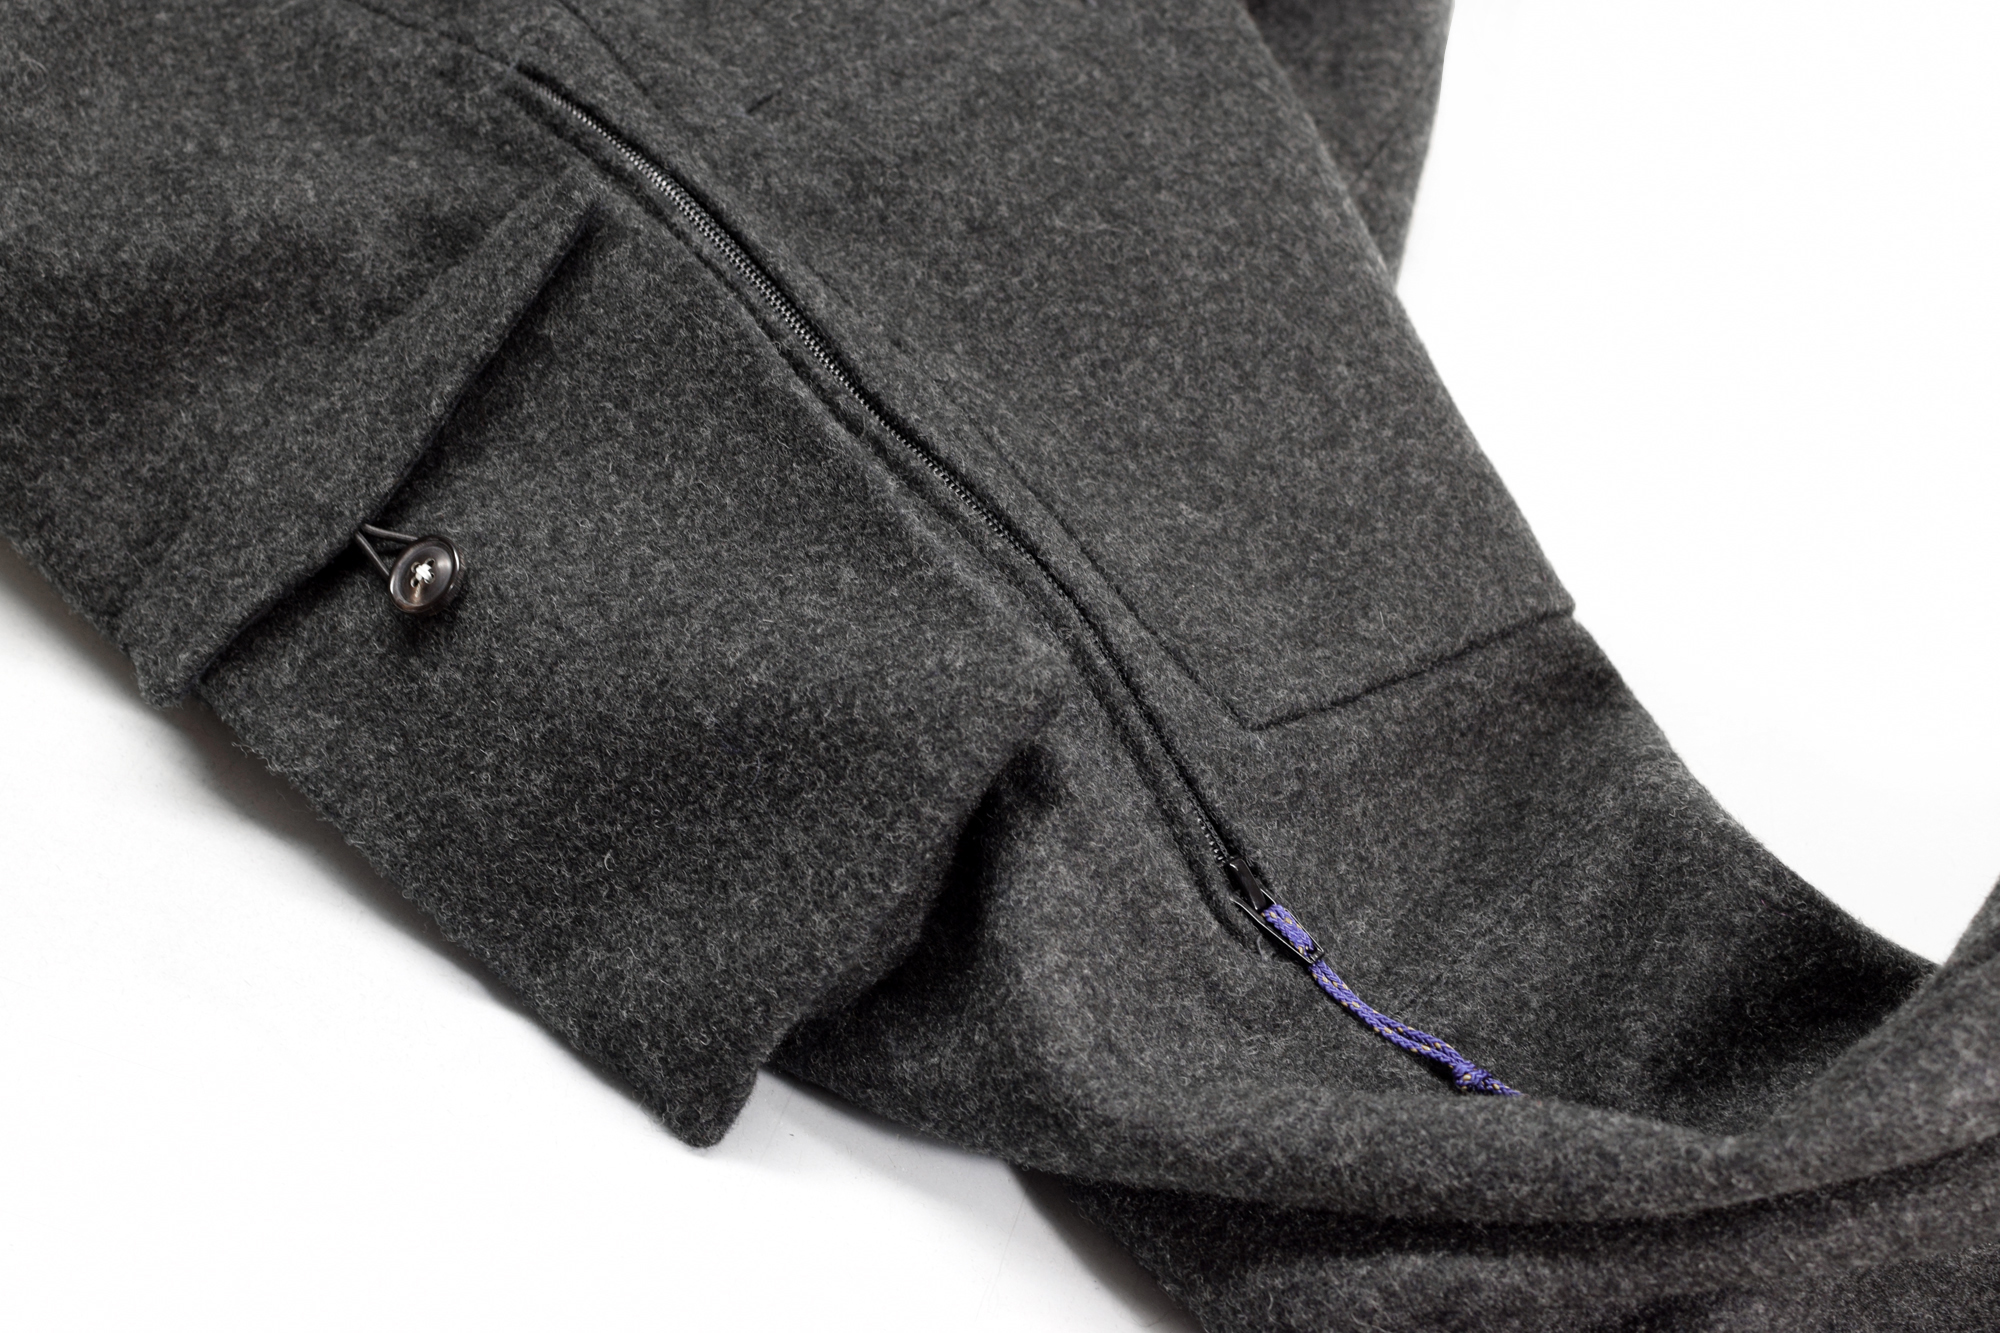 Custom Made Mountain Pants made of heavy, warm, durable Loden Wool Cloth